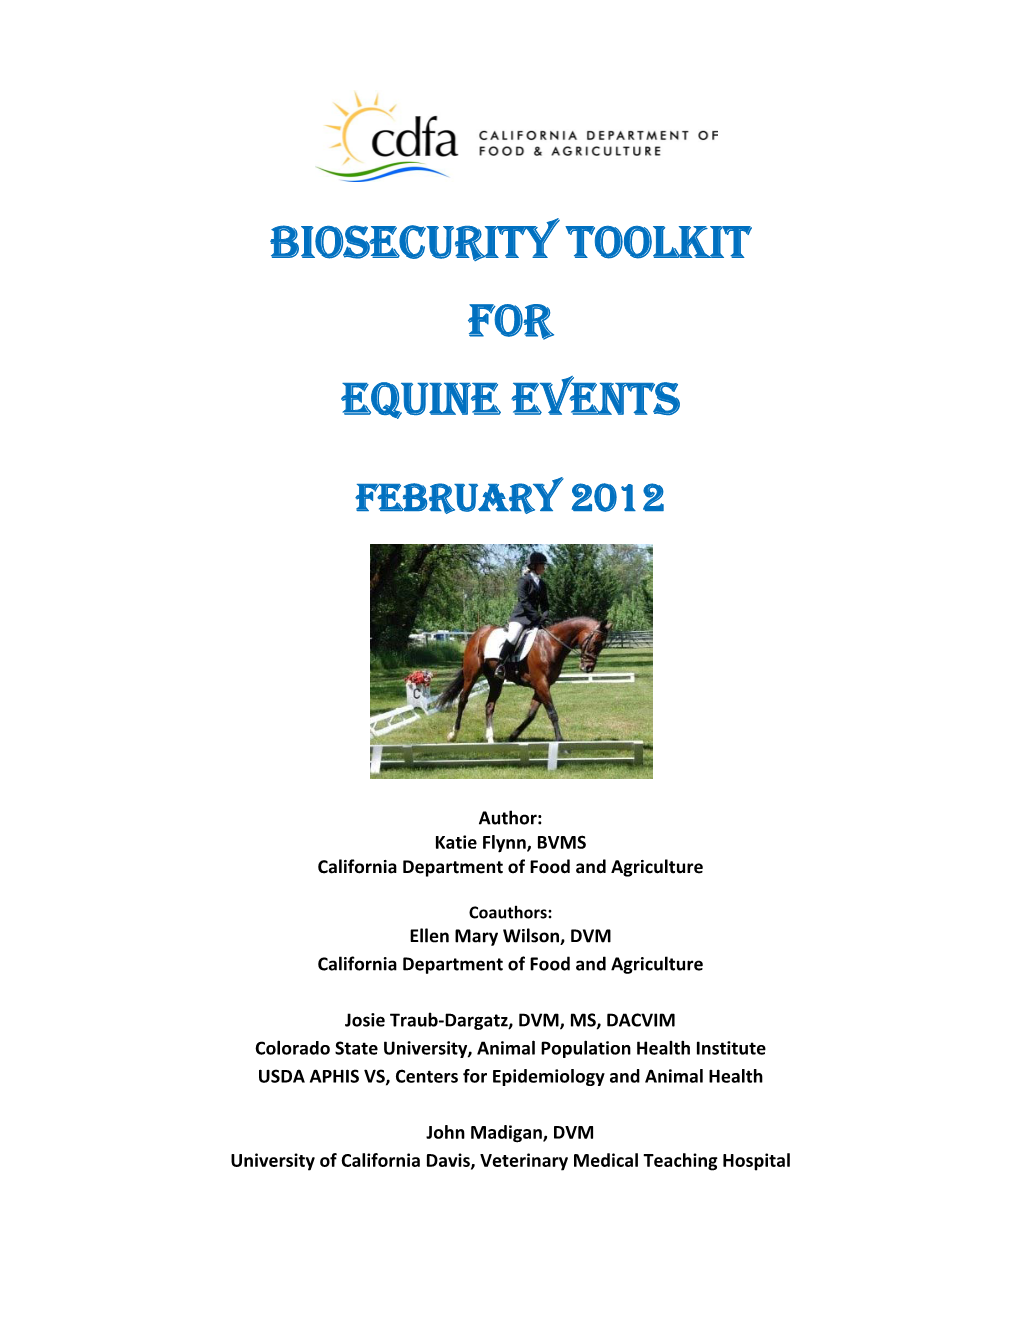 Biosecurity Toolkit for Equine Events